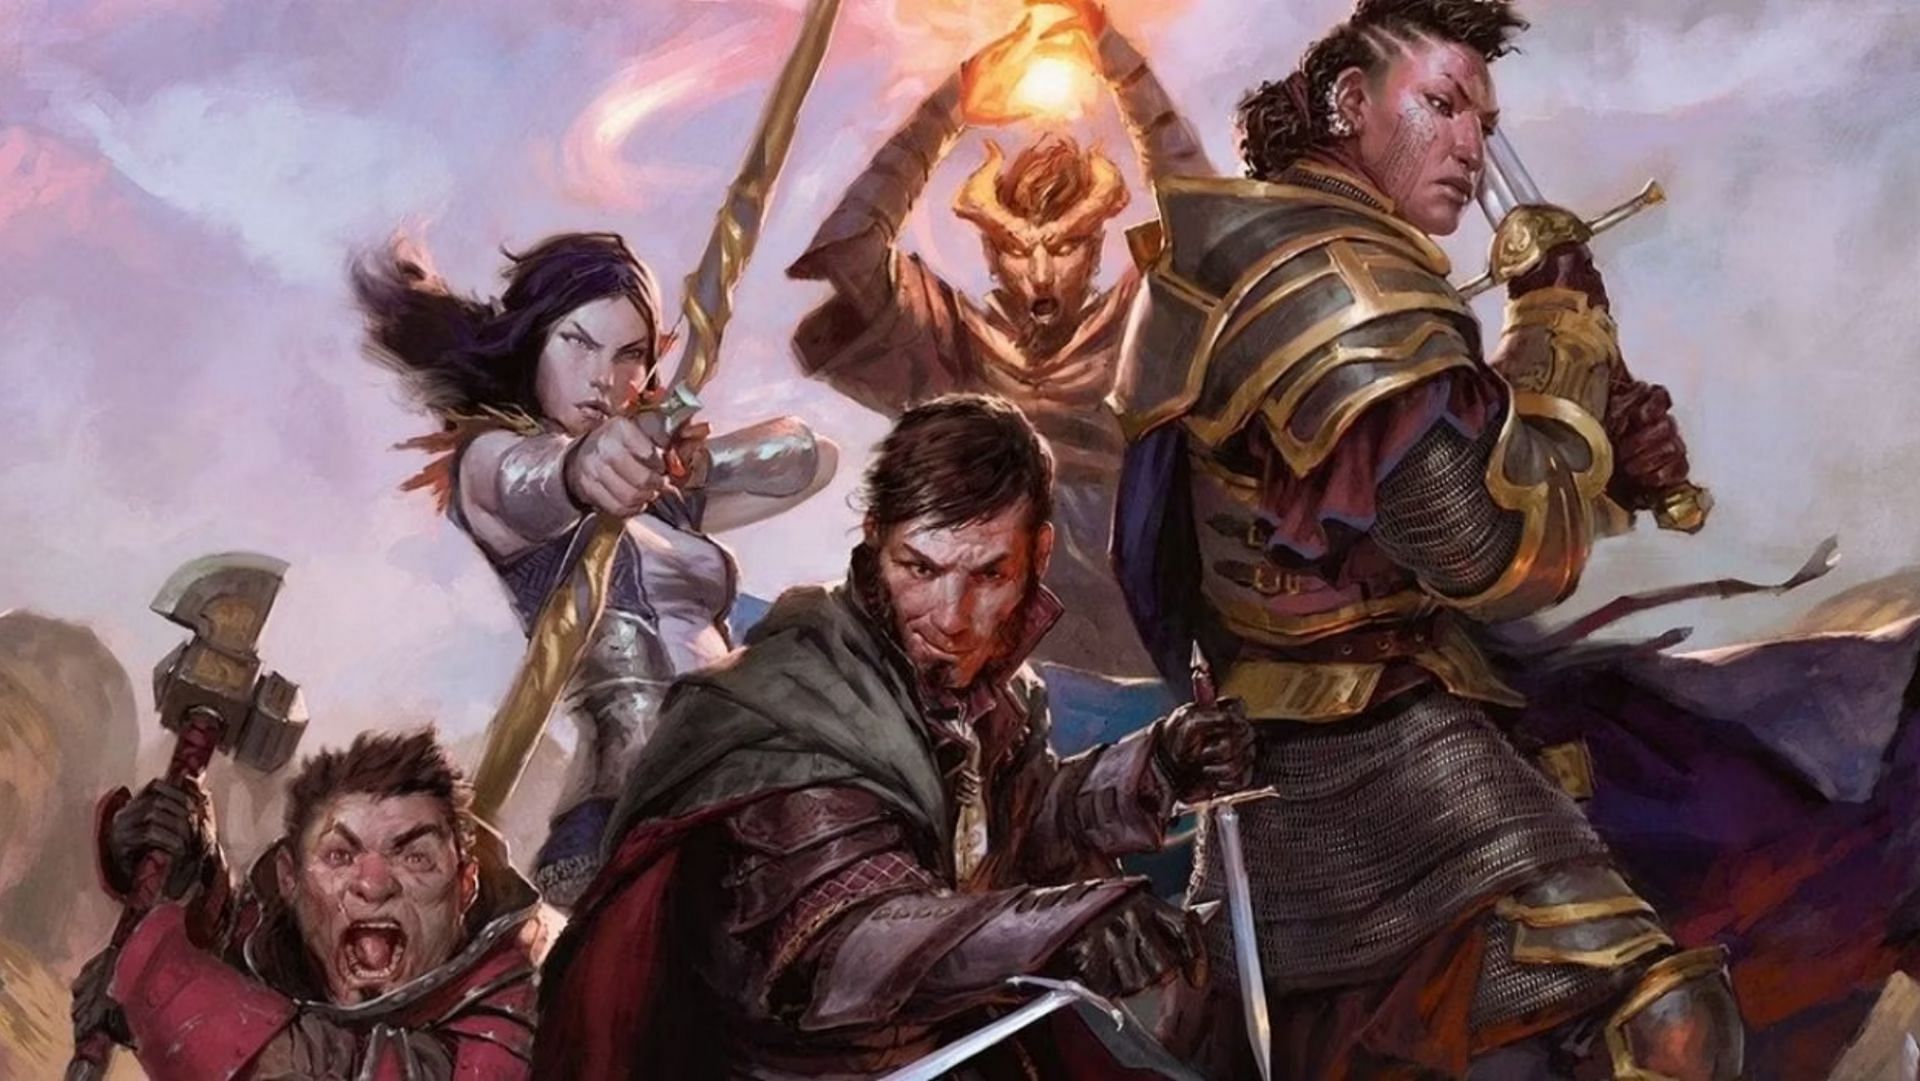 When playing Dungeons &amp; Dragons, each of the alignments has an archetype and means something.